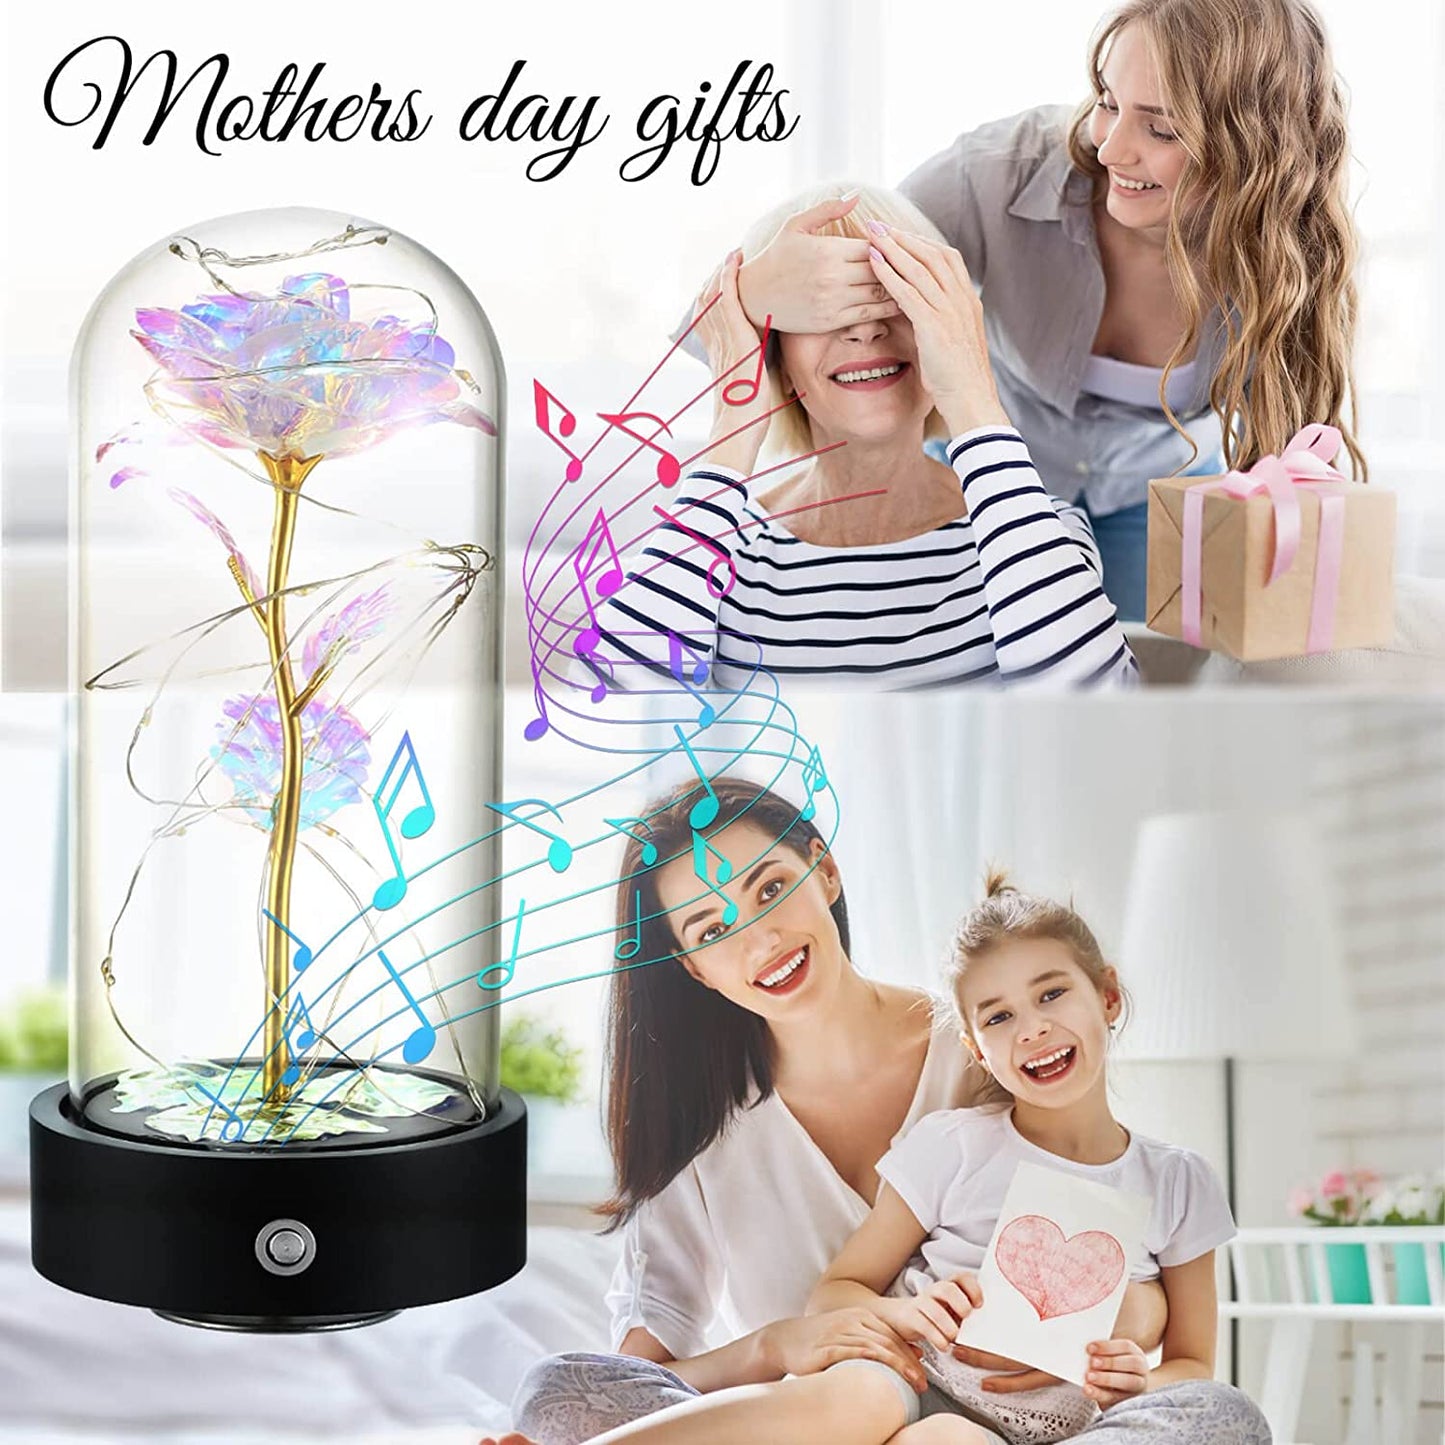 Christmas Rose Gifts for Women, Beauty and the Beast Galaxy Enchanted Rose Music Box, Forever Flower Gifts for Mom Wife Girlfriend Grandma, Personalized Anniversary Presents LED Rose in Glass Dome